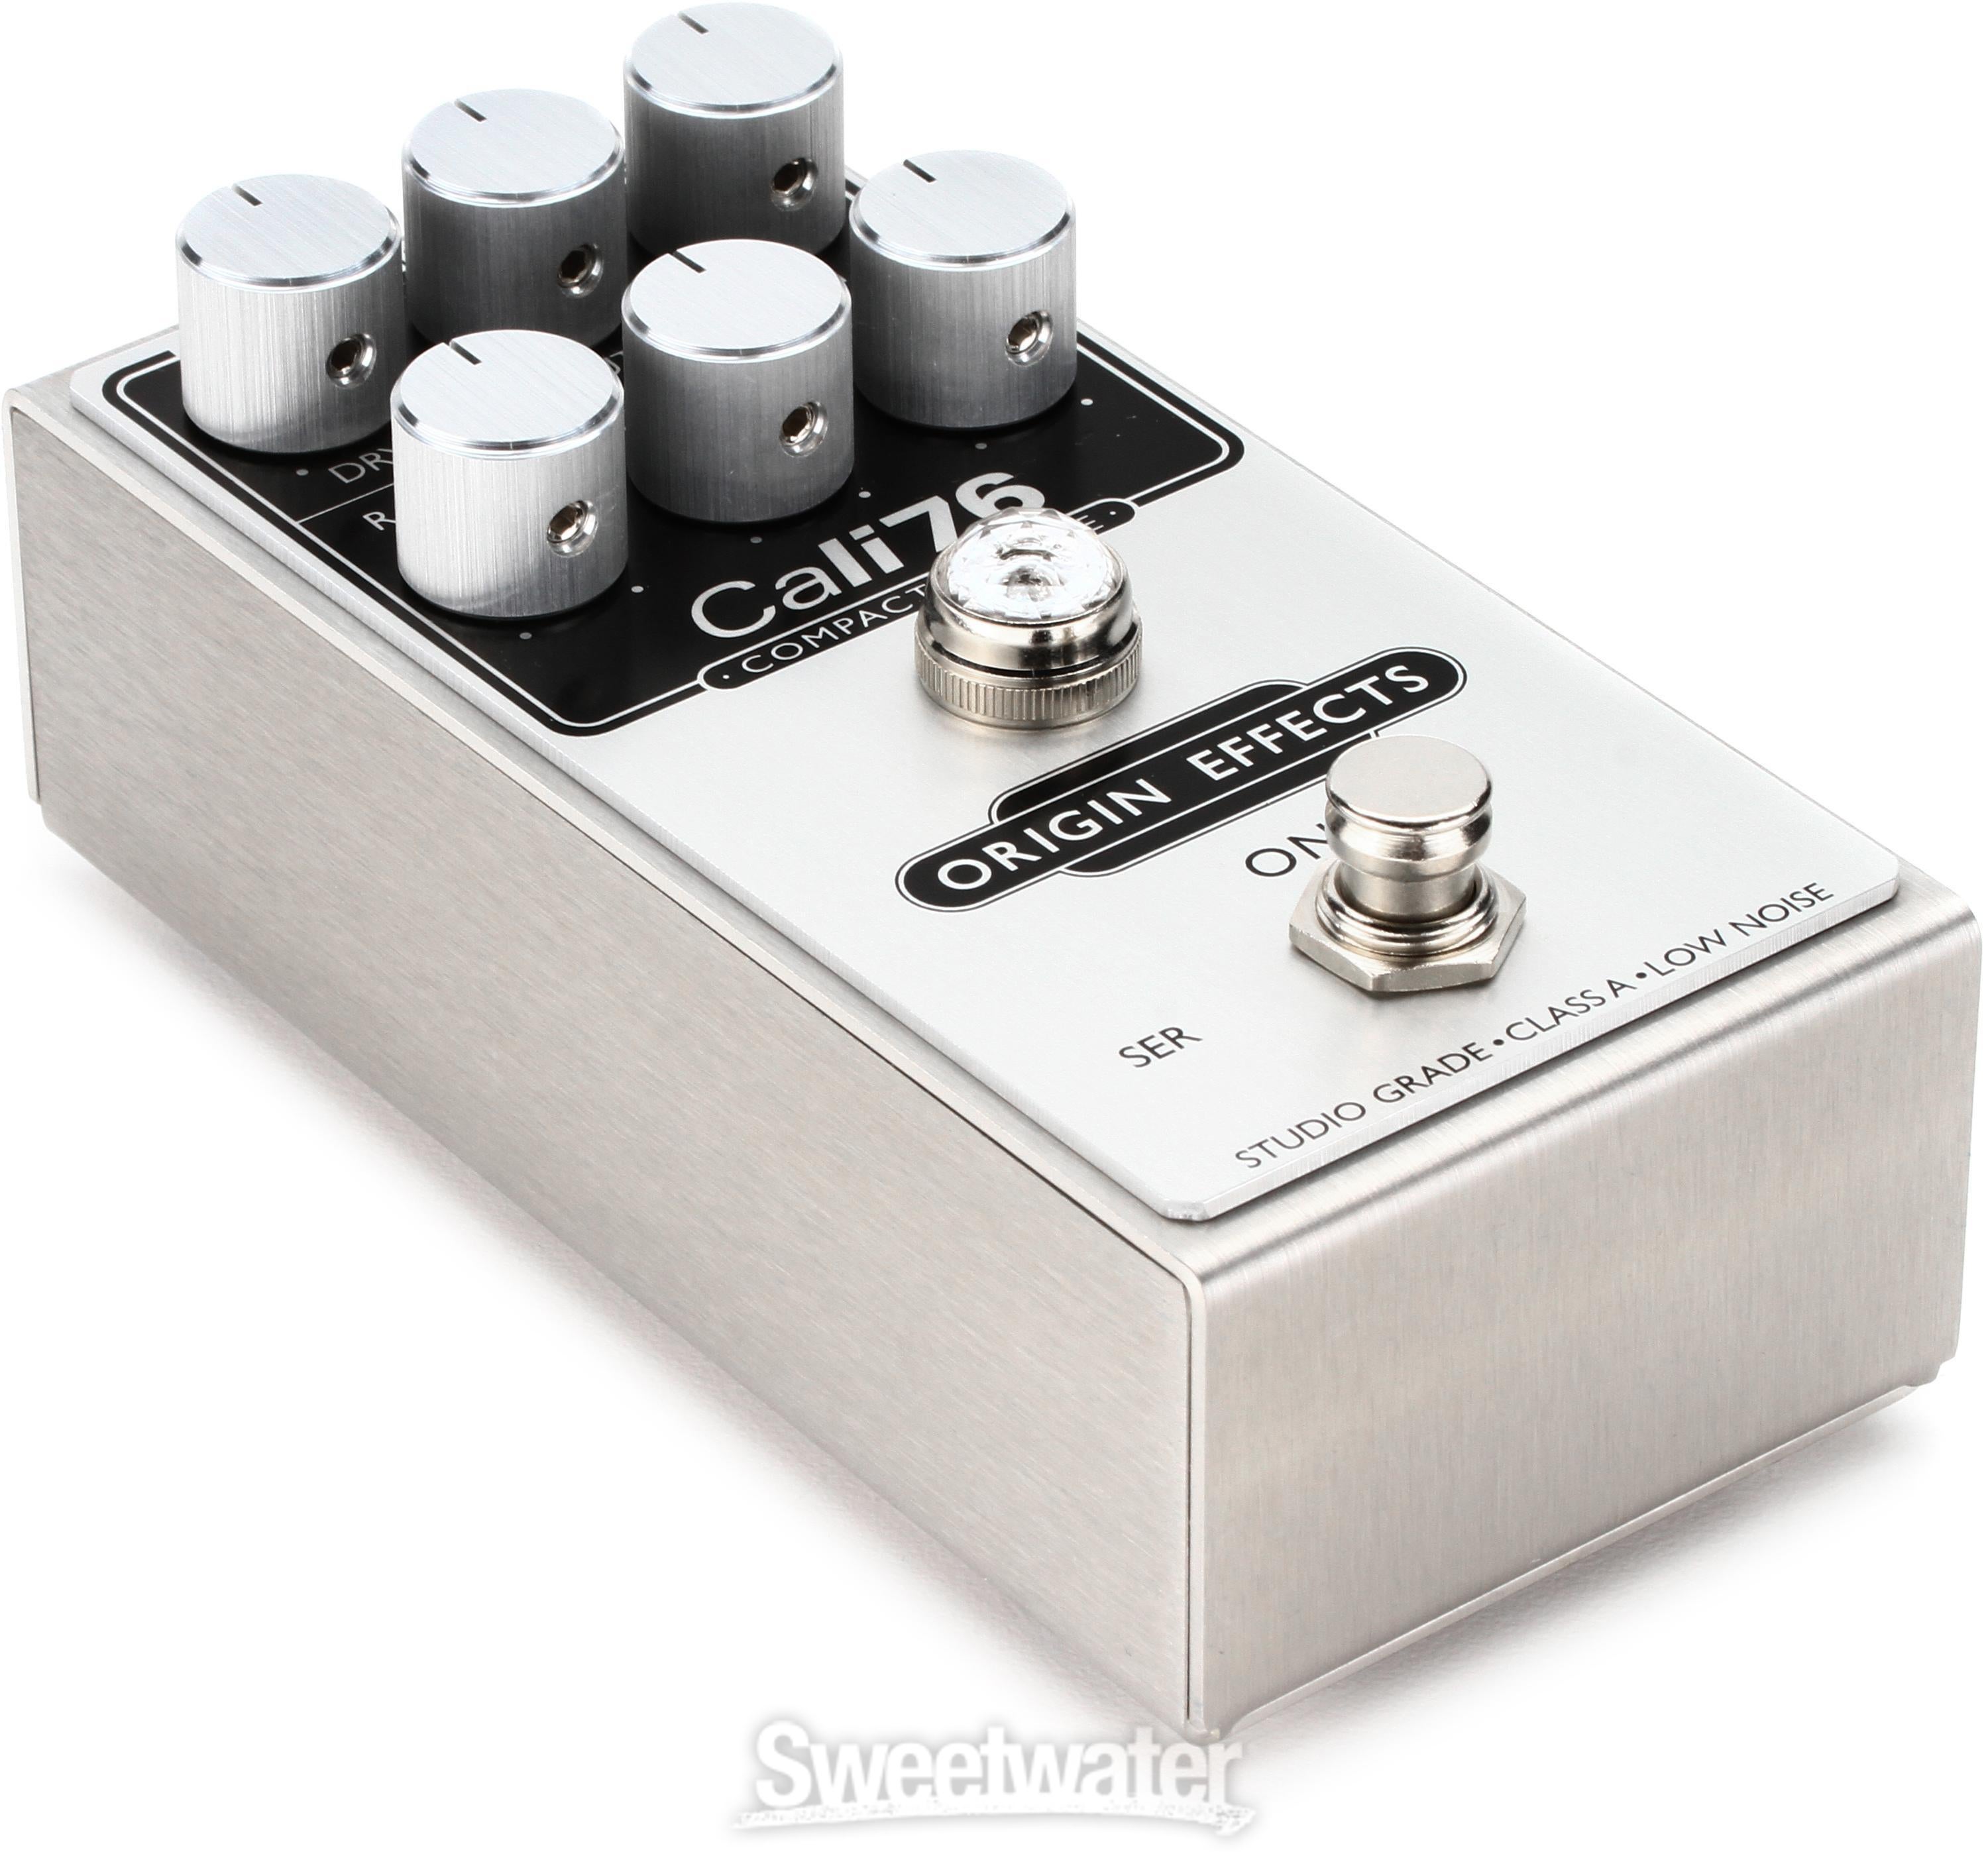 Origin Effects Cali76 Compact Deluxe Compressor Pedal | Sweetwater